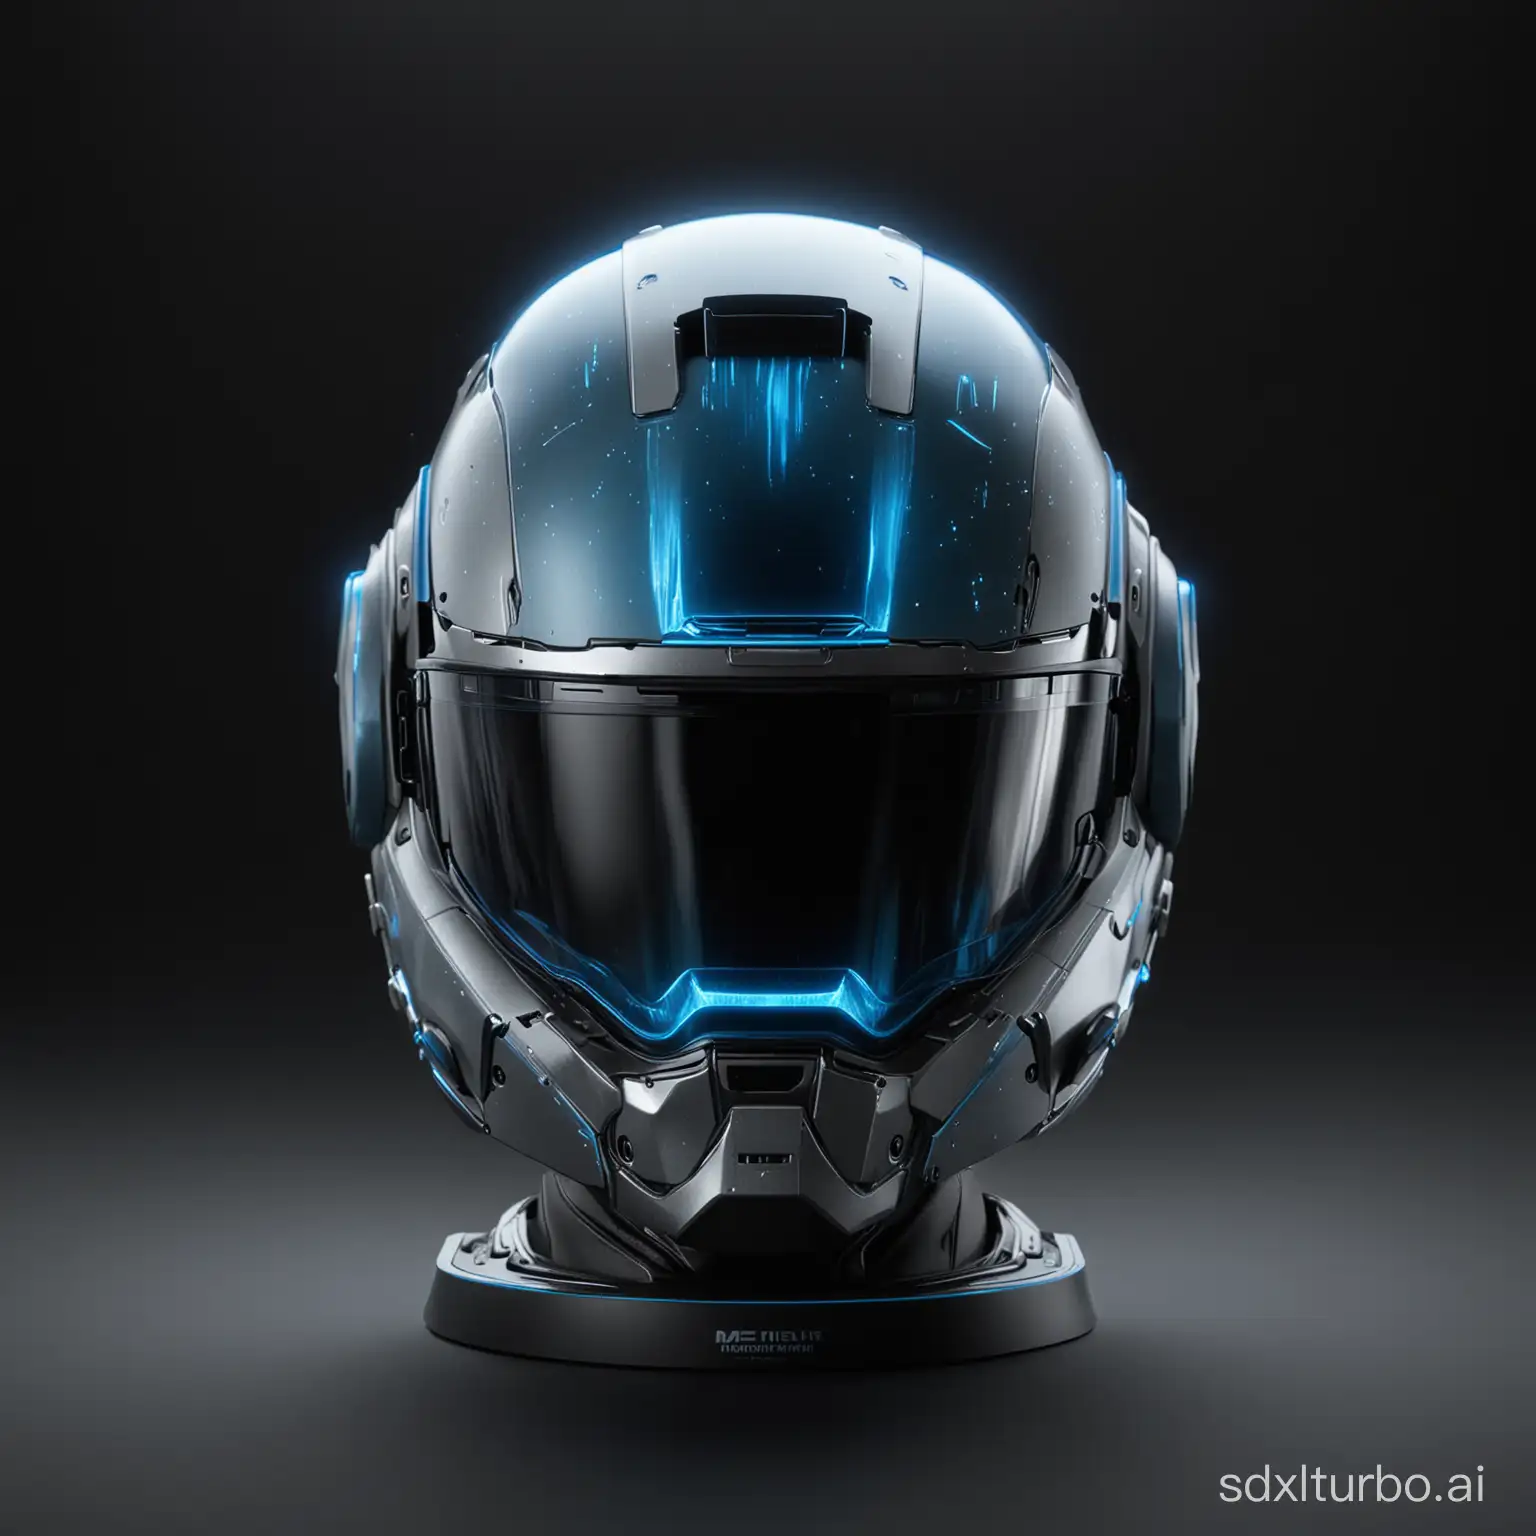 A solo helmet display, futuristic tech feel, exquisite lifelike details, interstellar style, blue-gray color, emitting a tech blue flame, 8K high-definition image, close-up side lens, no text, pure black background.